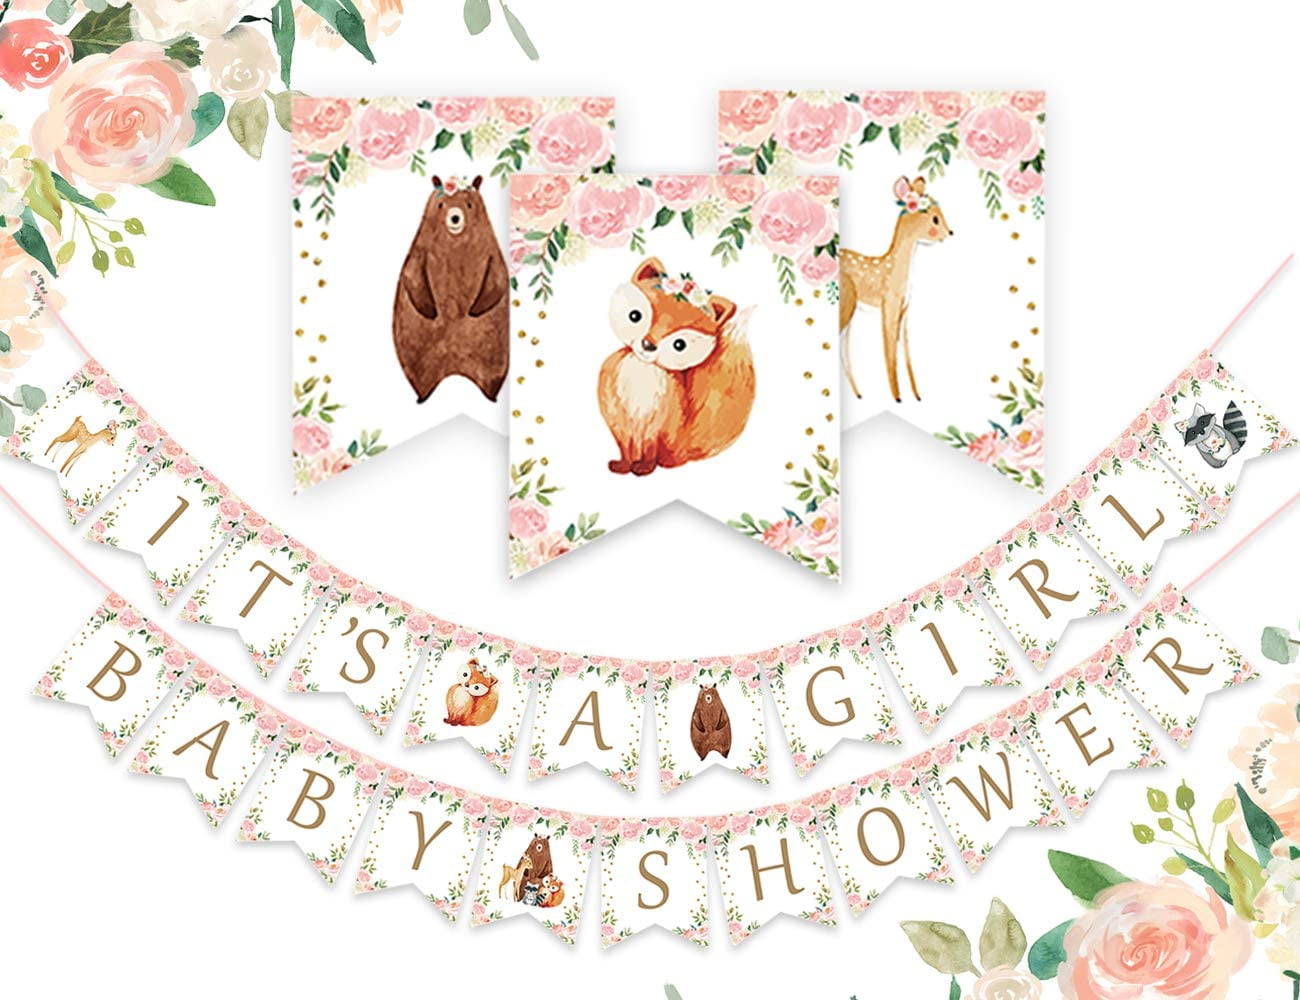 Woodland Baby Shower Decorations Girl Pink Woodland Creatures Baby Shower Its A Girl Banner Forest Animal Cutouts Mommy to Be Sash